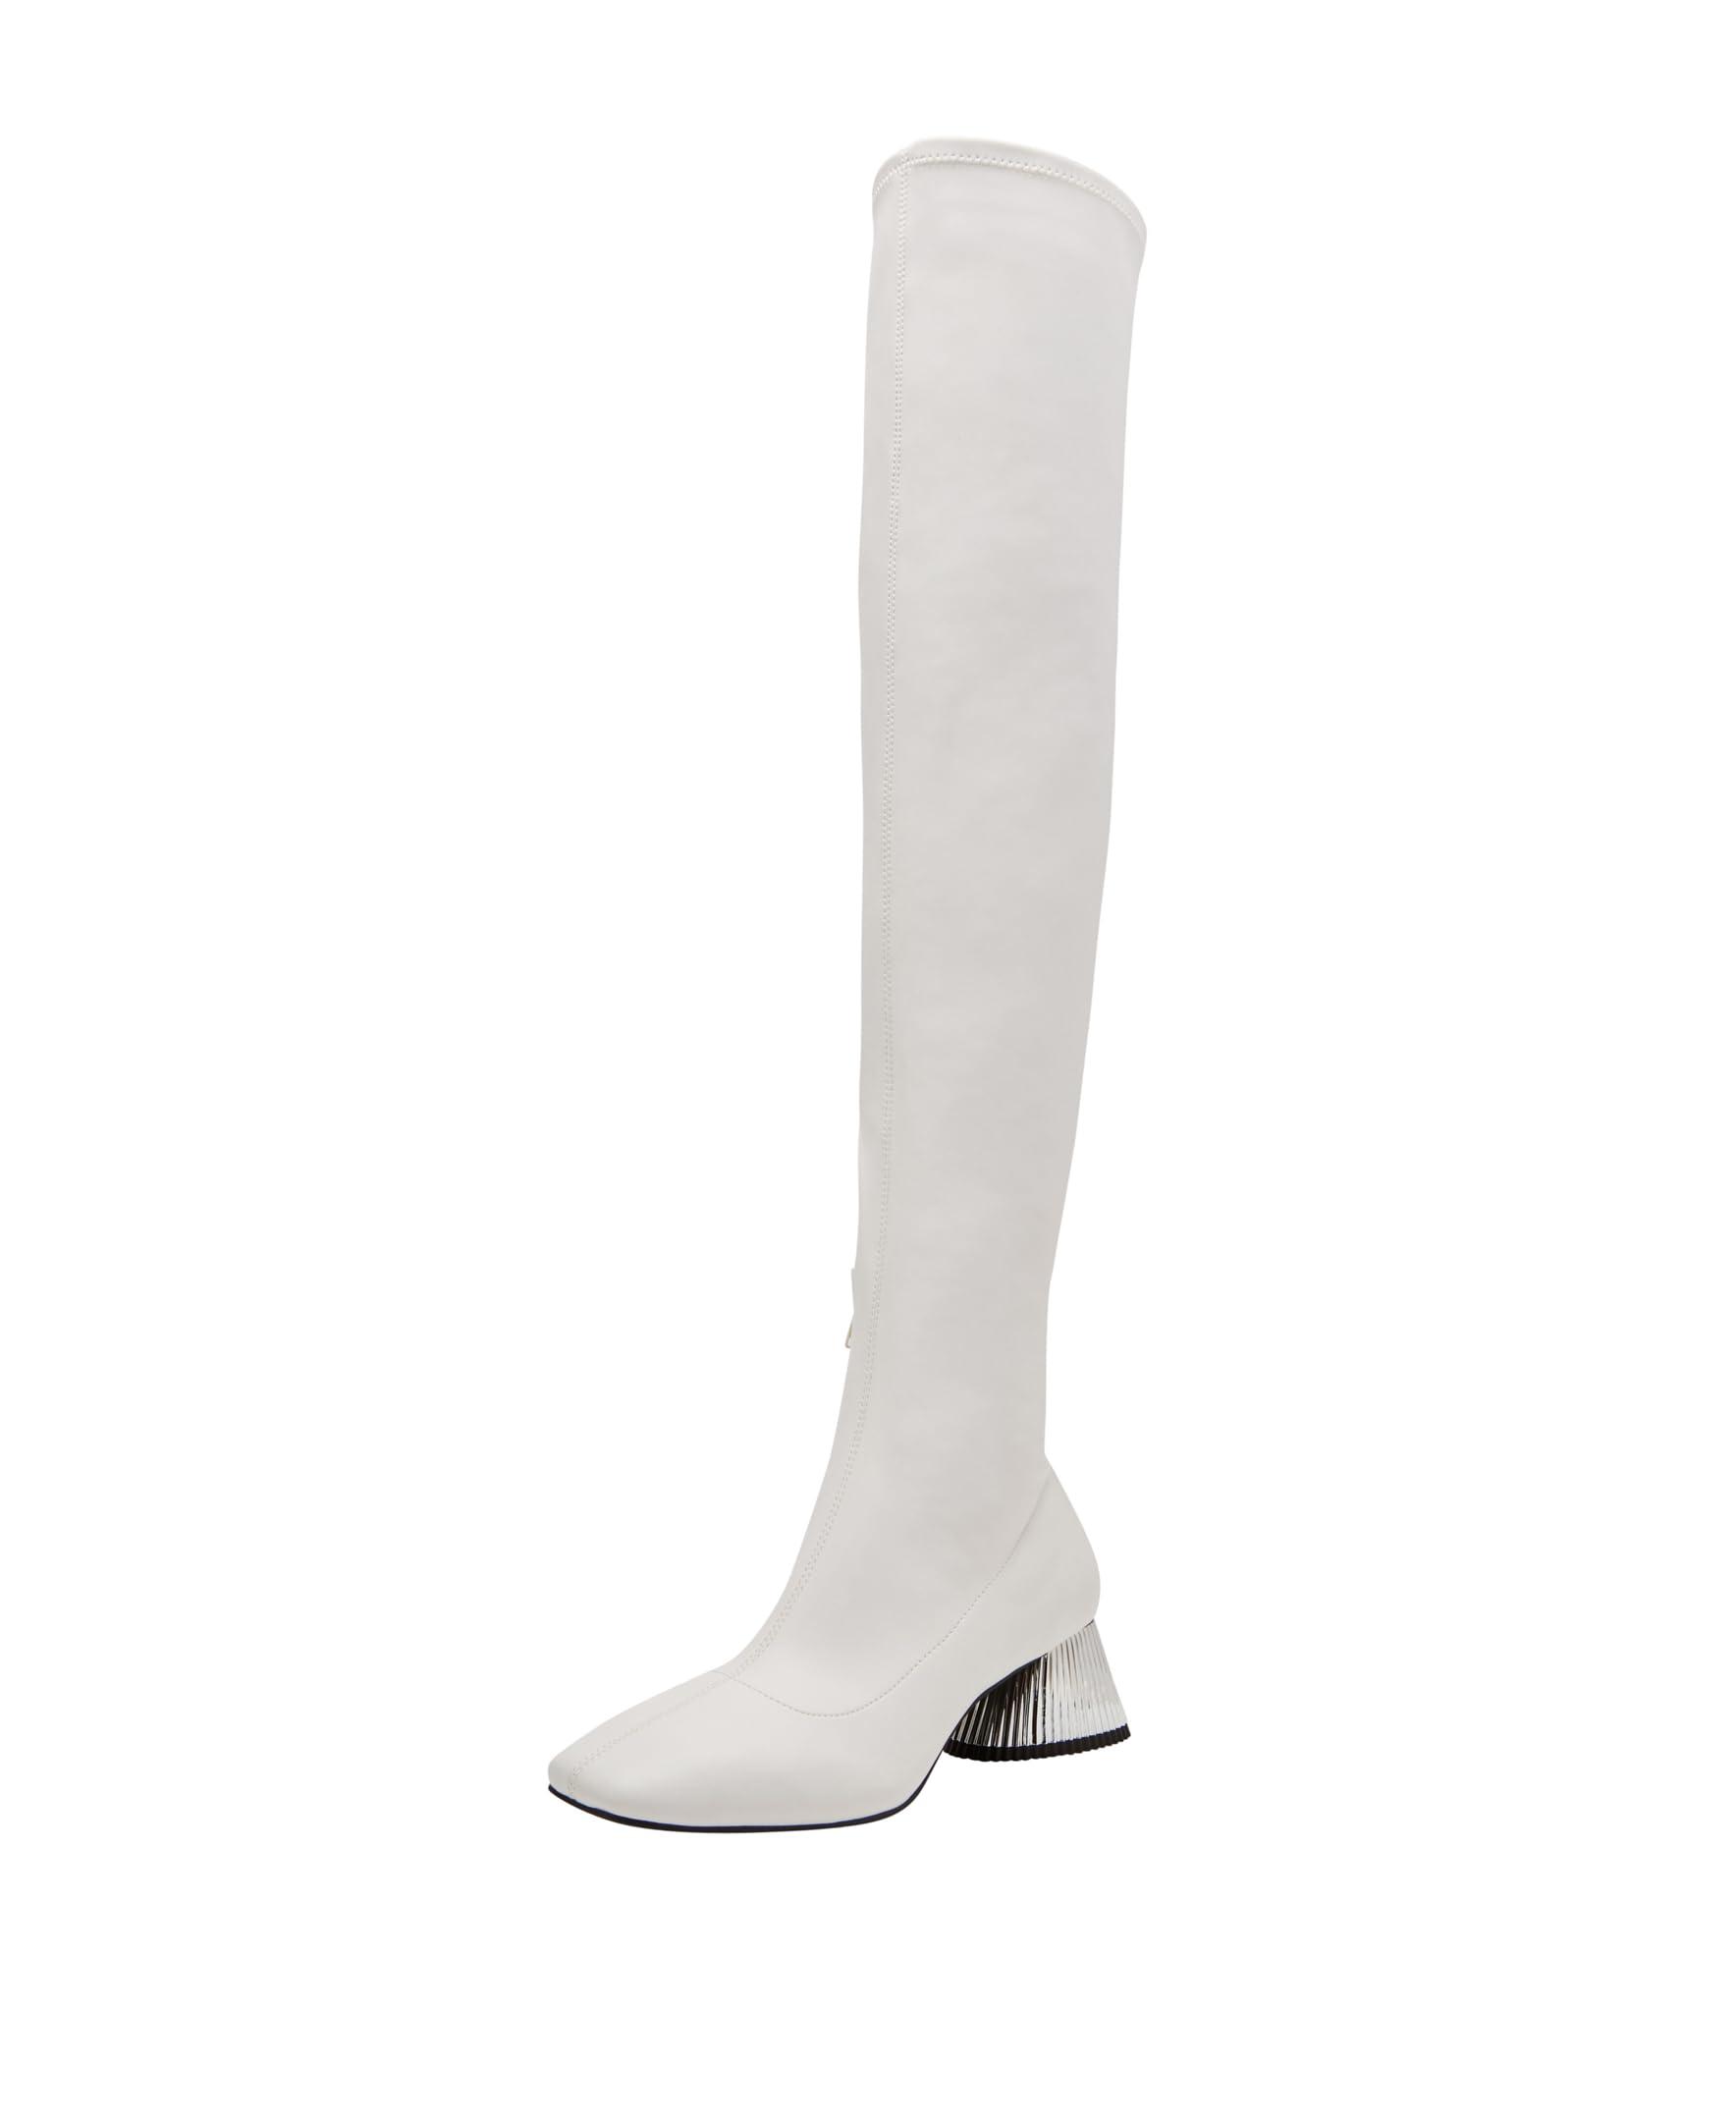 Katy Perry The Clarra Otk Boot Over-the-knee in White | Lyst